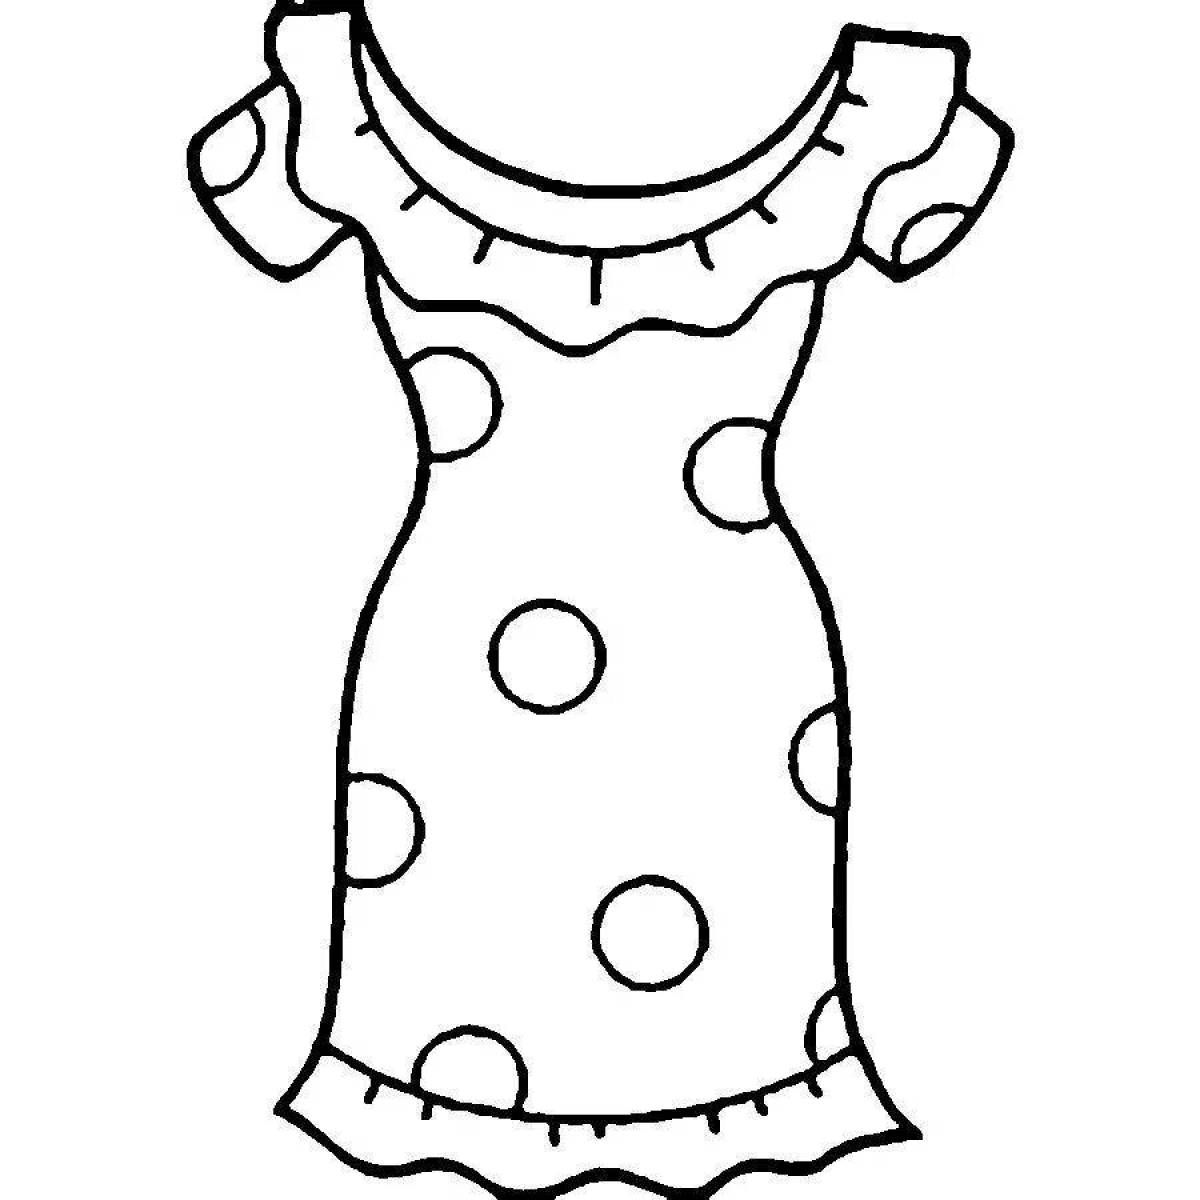 Coloring book magic dress for dolls